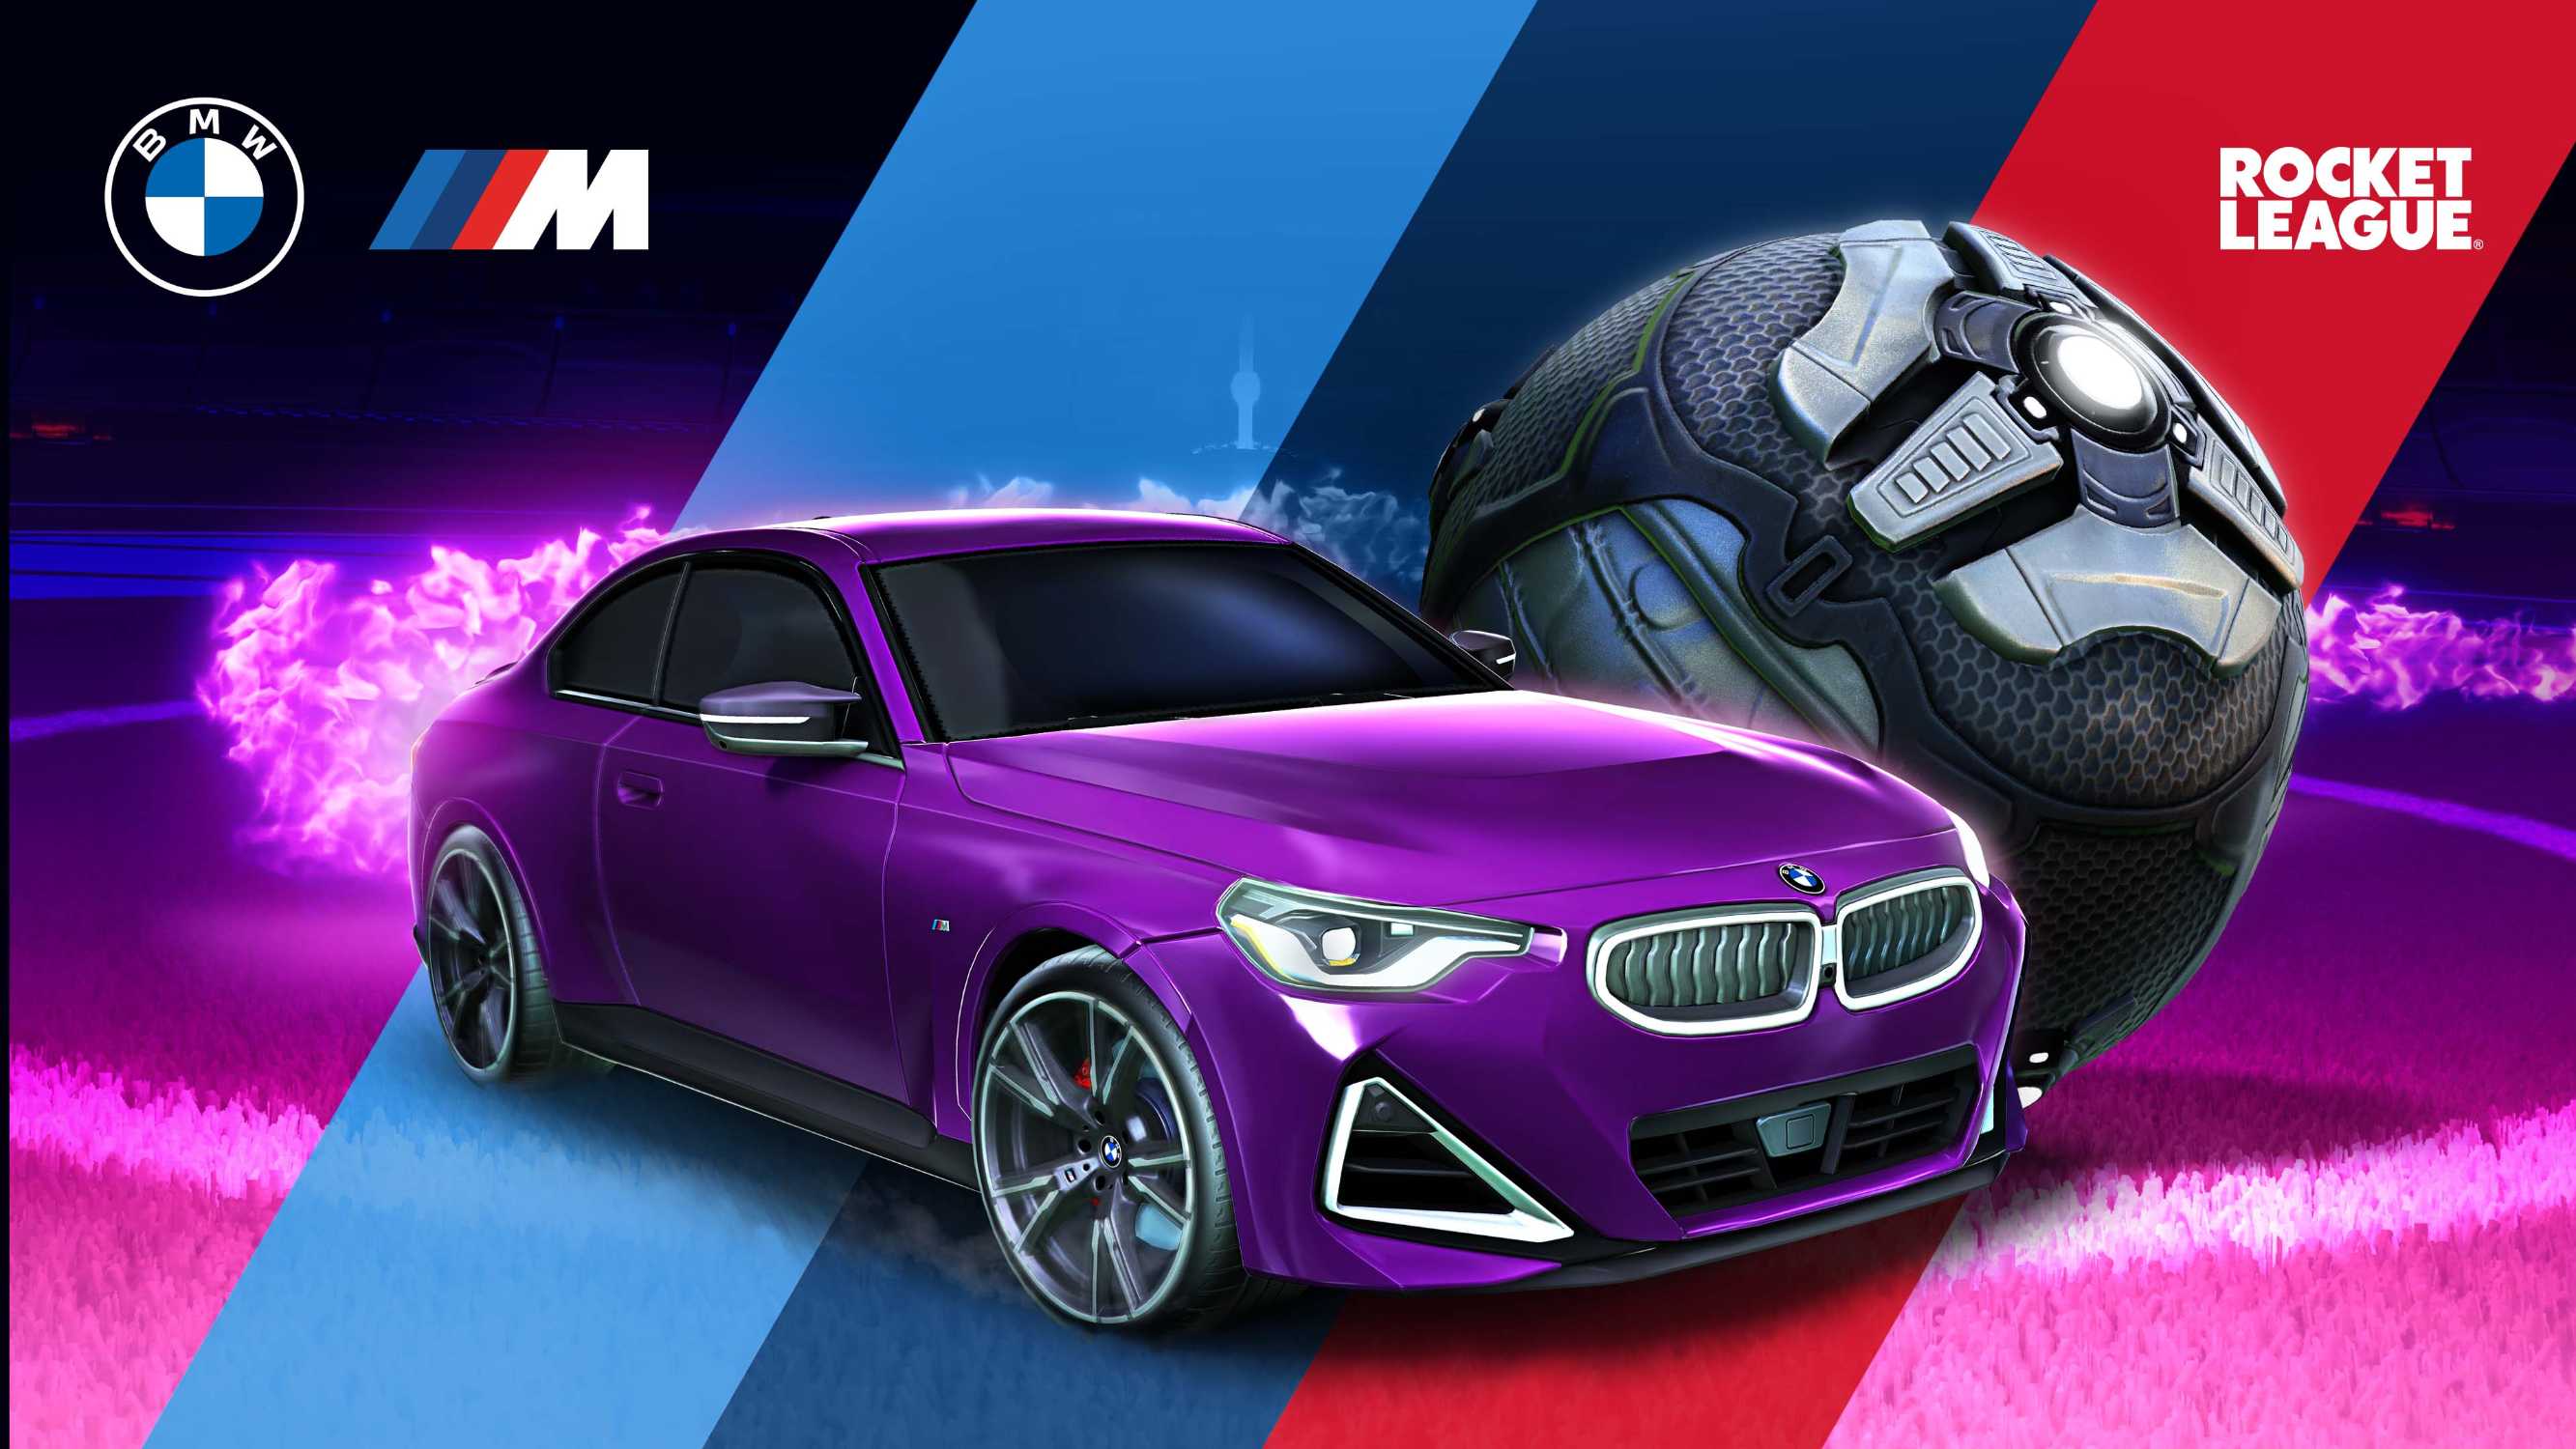 New BMW M240i lifts off in Rocket League